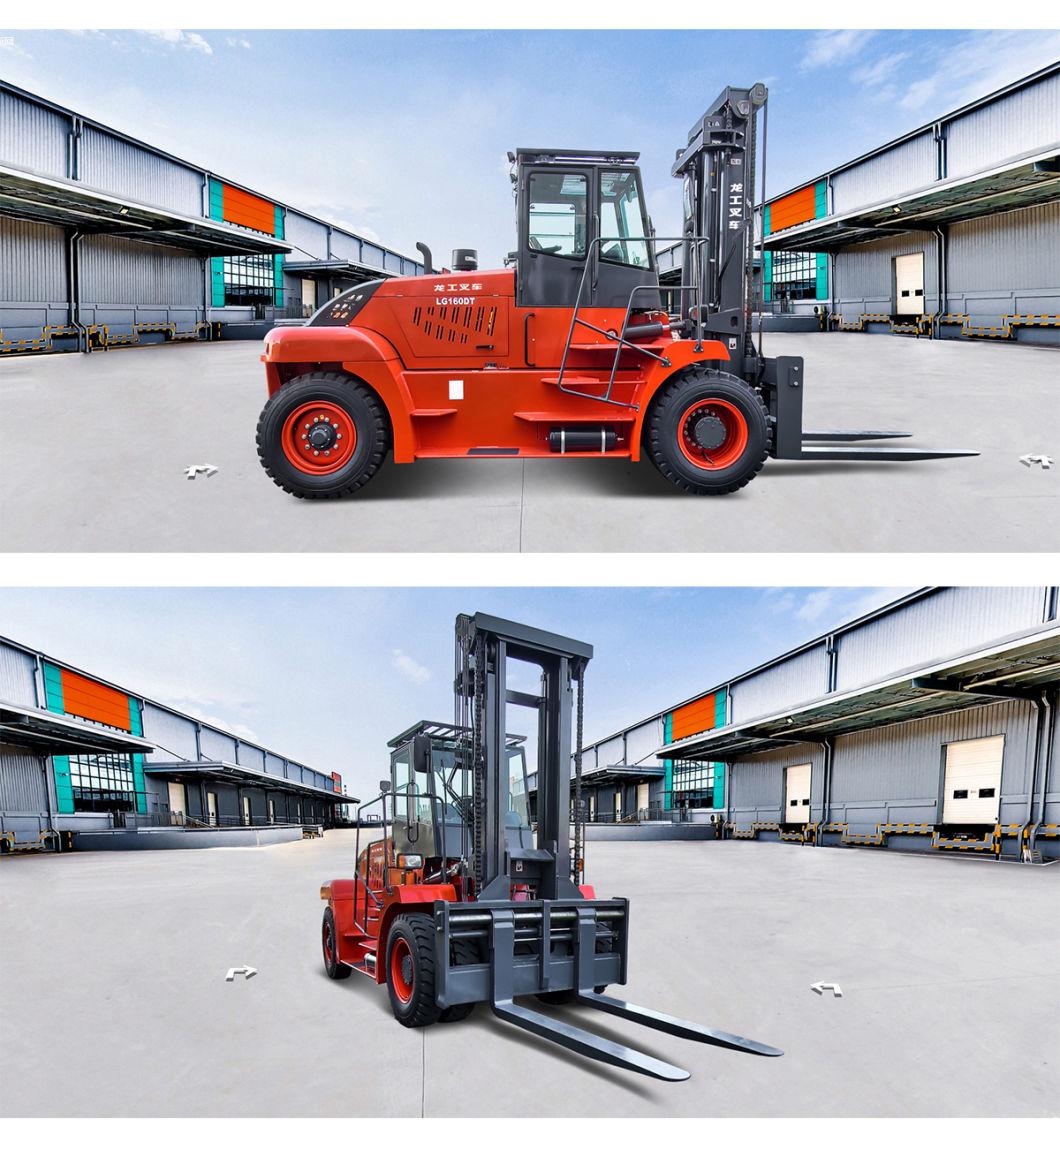 Cheap Price 16 Ton Diesel Forklift with Turbocharging and High Power